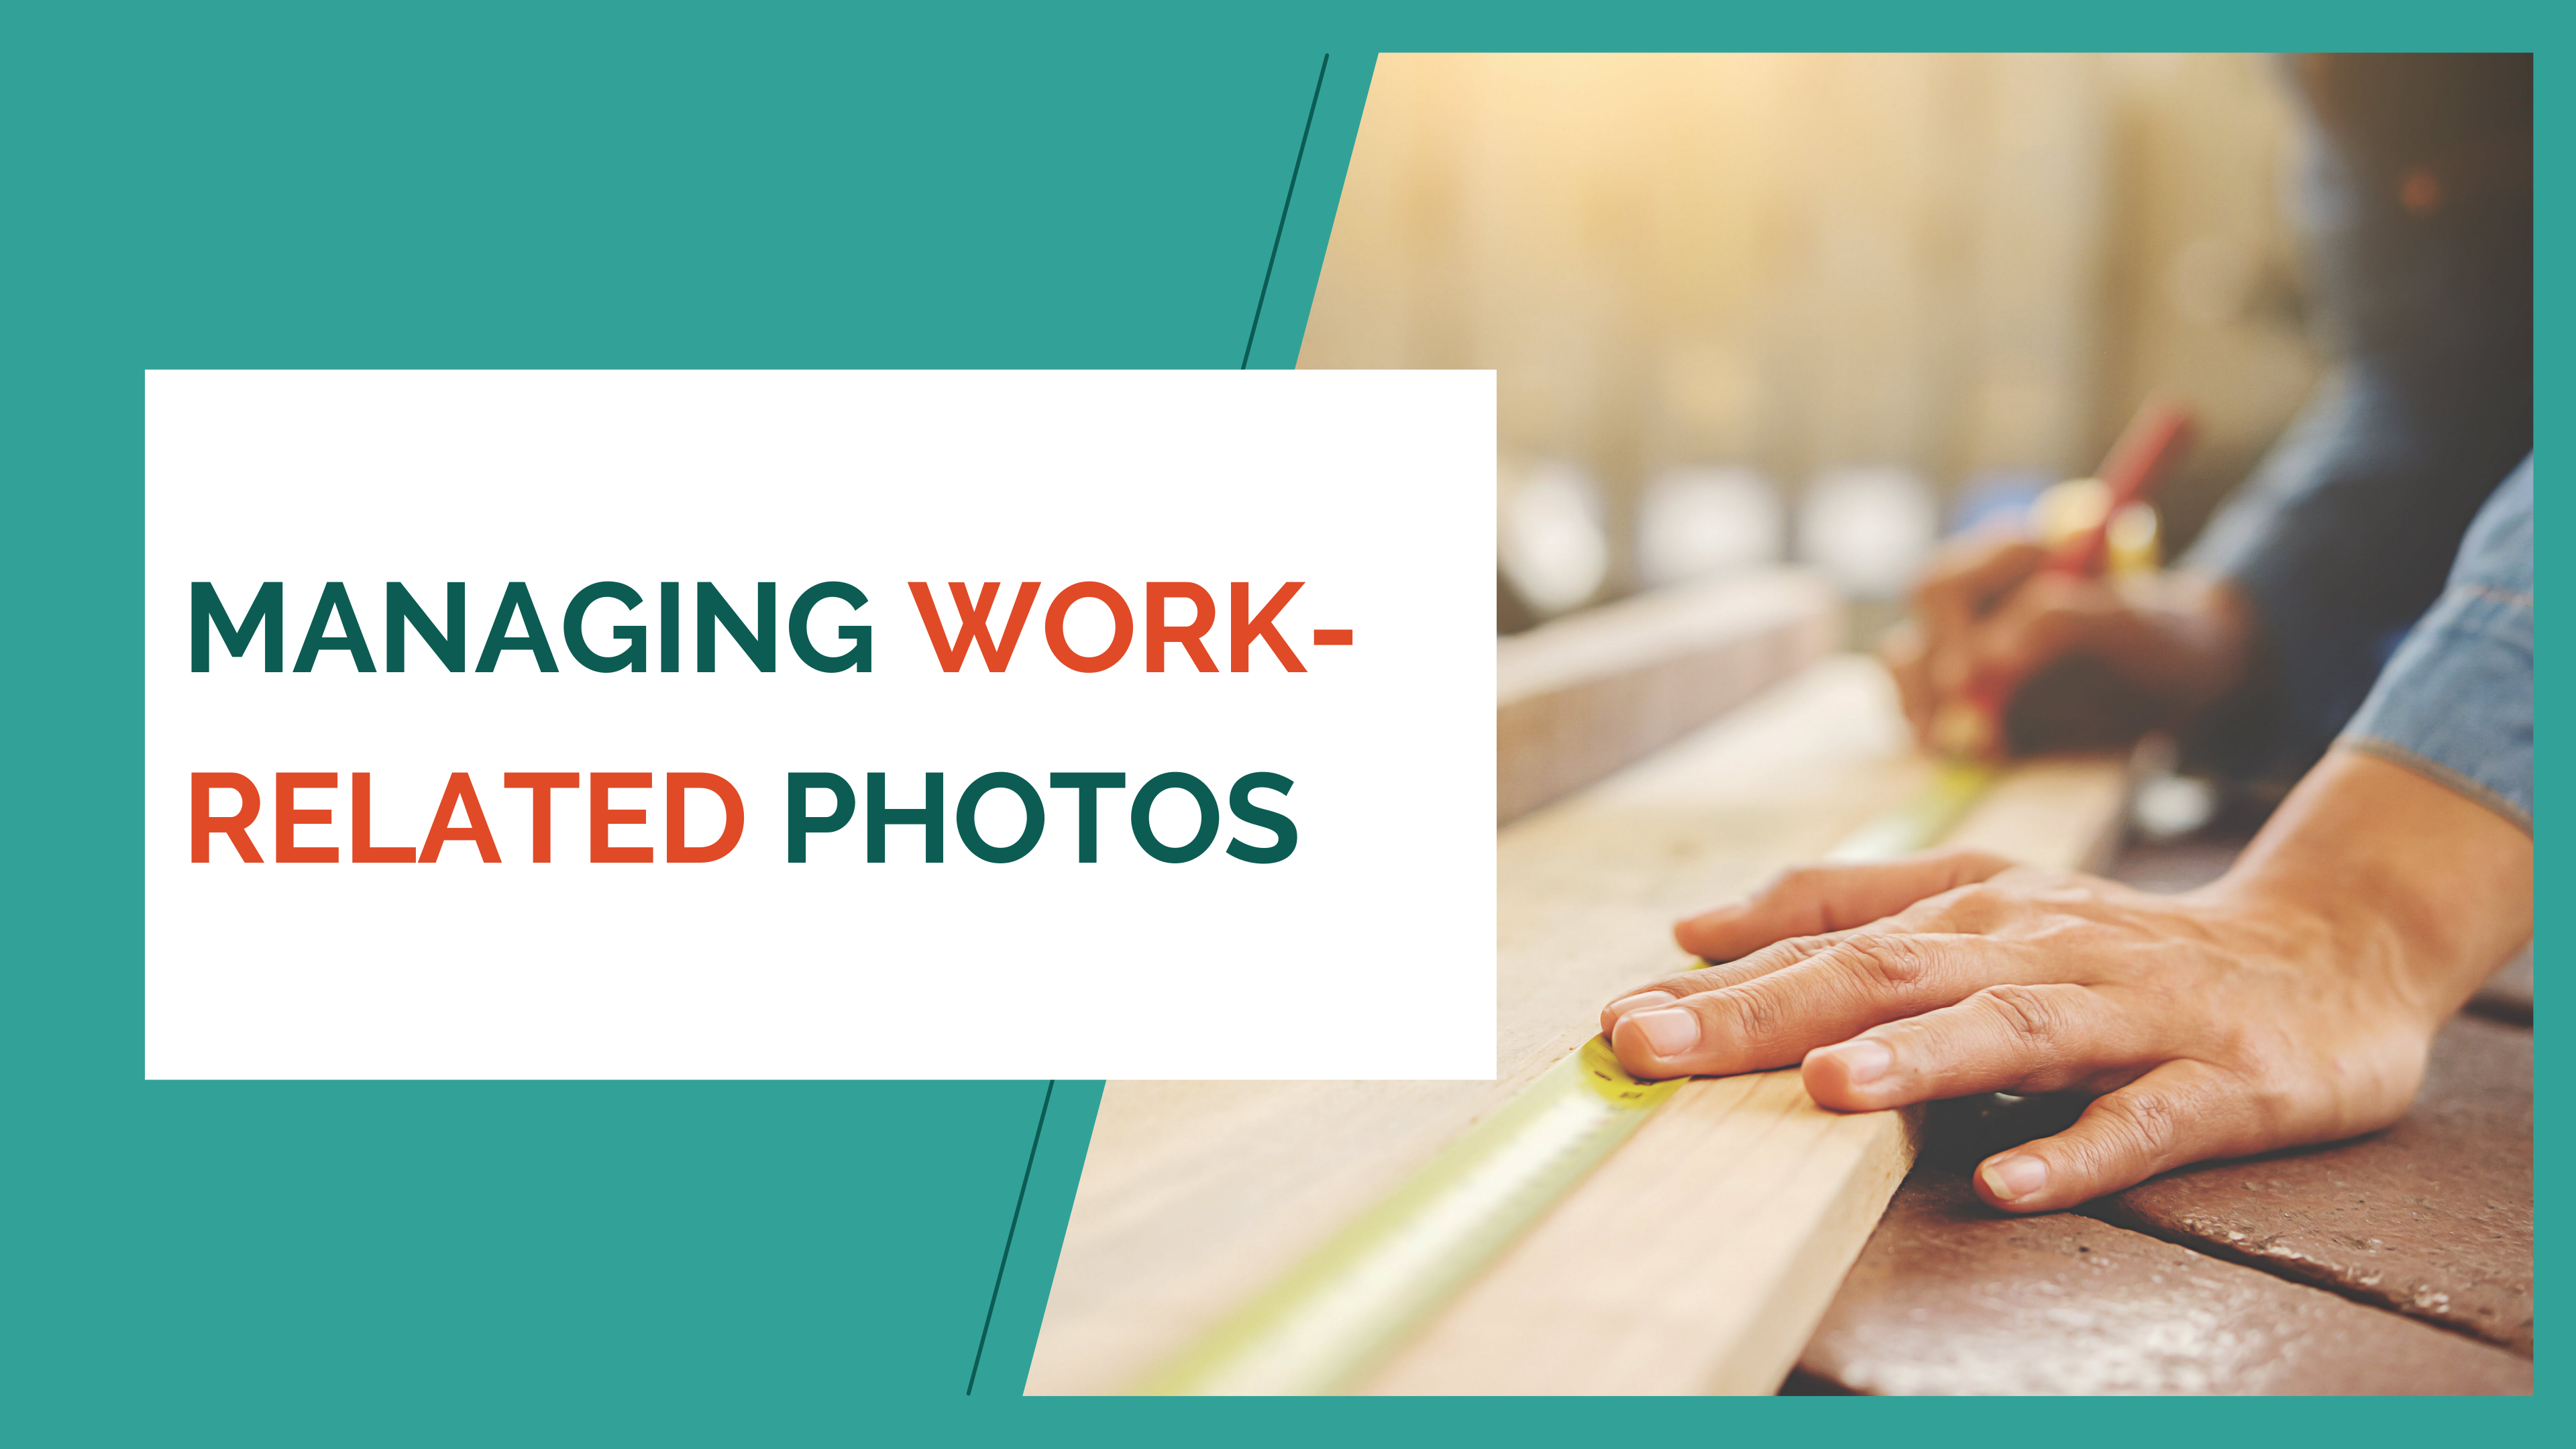 Managing work-related photos